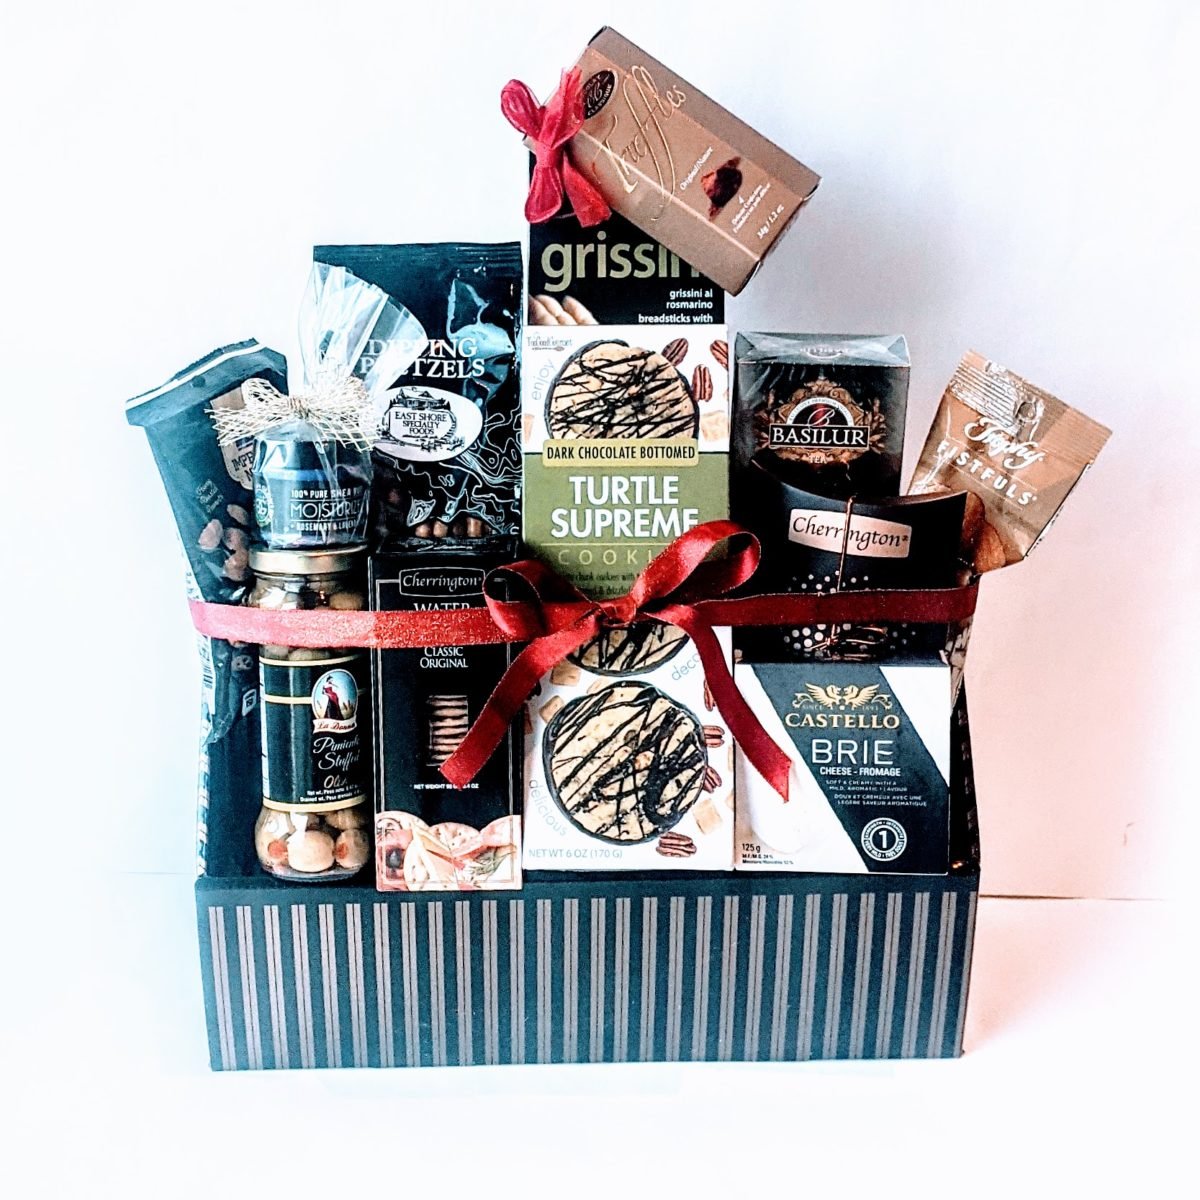 holiday gifts and gift baskets for friends, family and colleagues